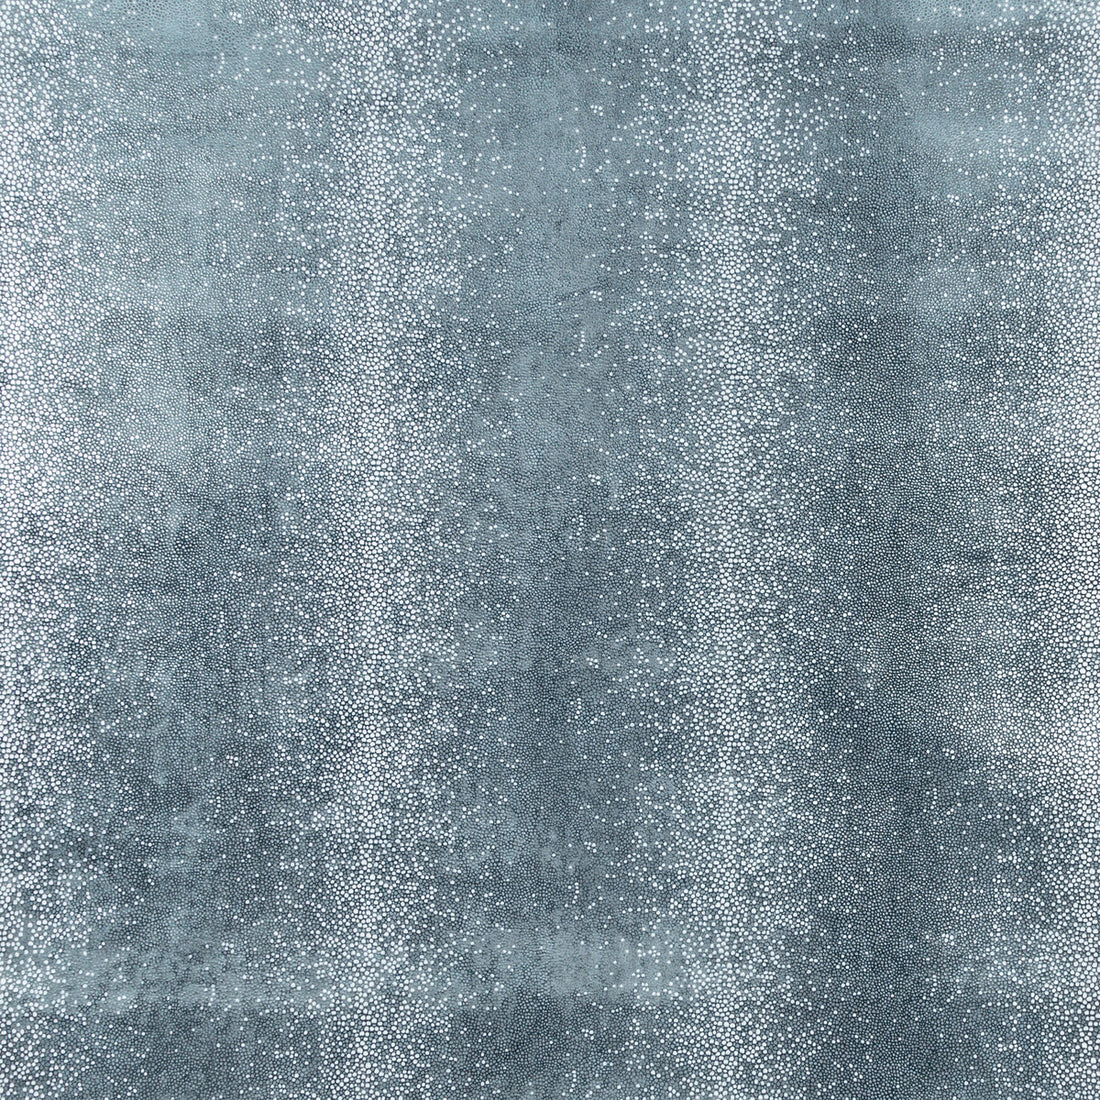 Kravet Couture fabric in 34031-5 color - pattern 34031.5.0 - by Kravet Couture